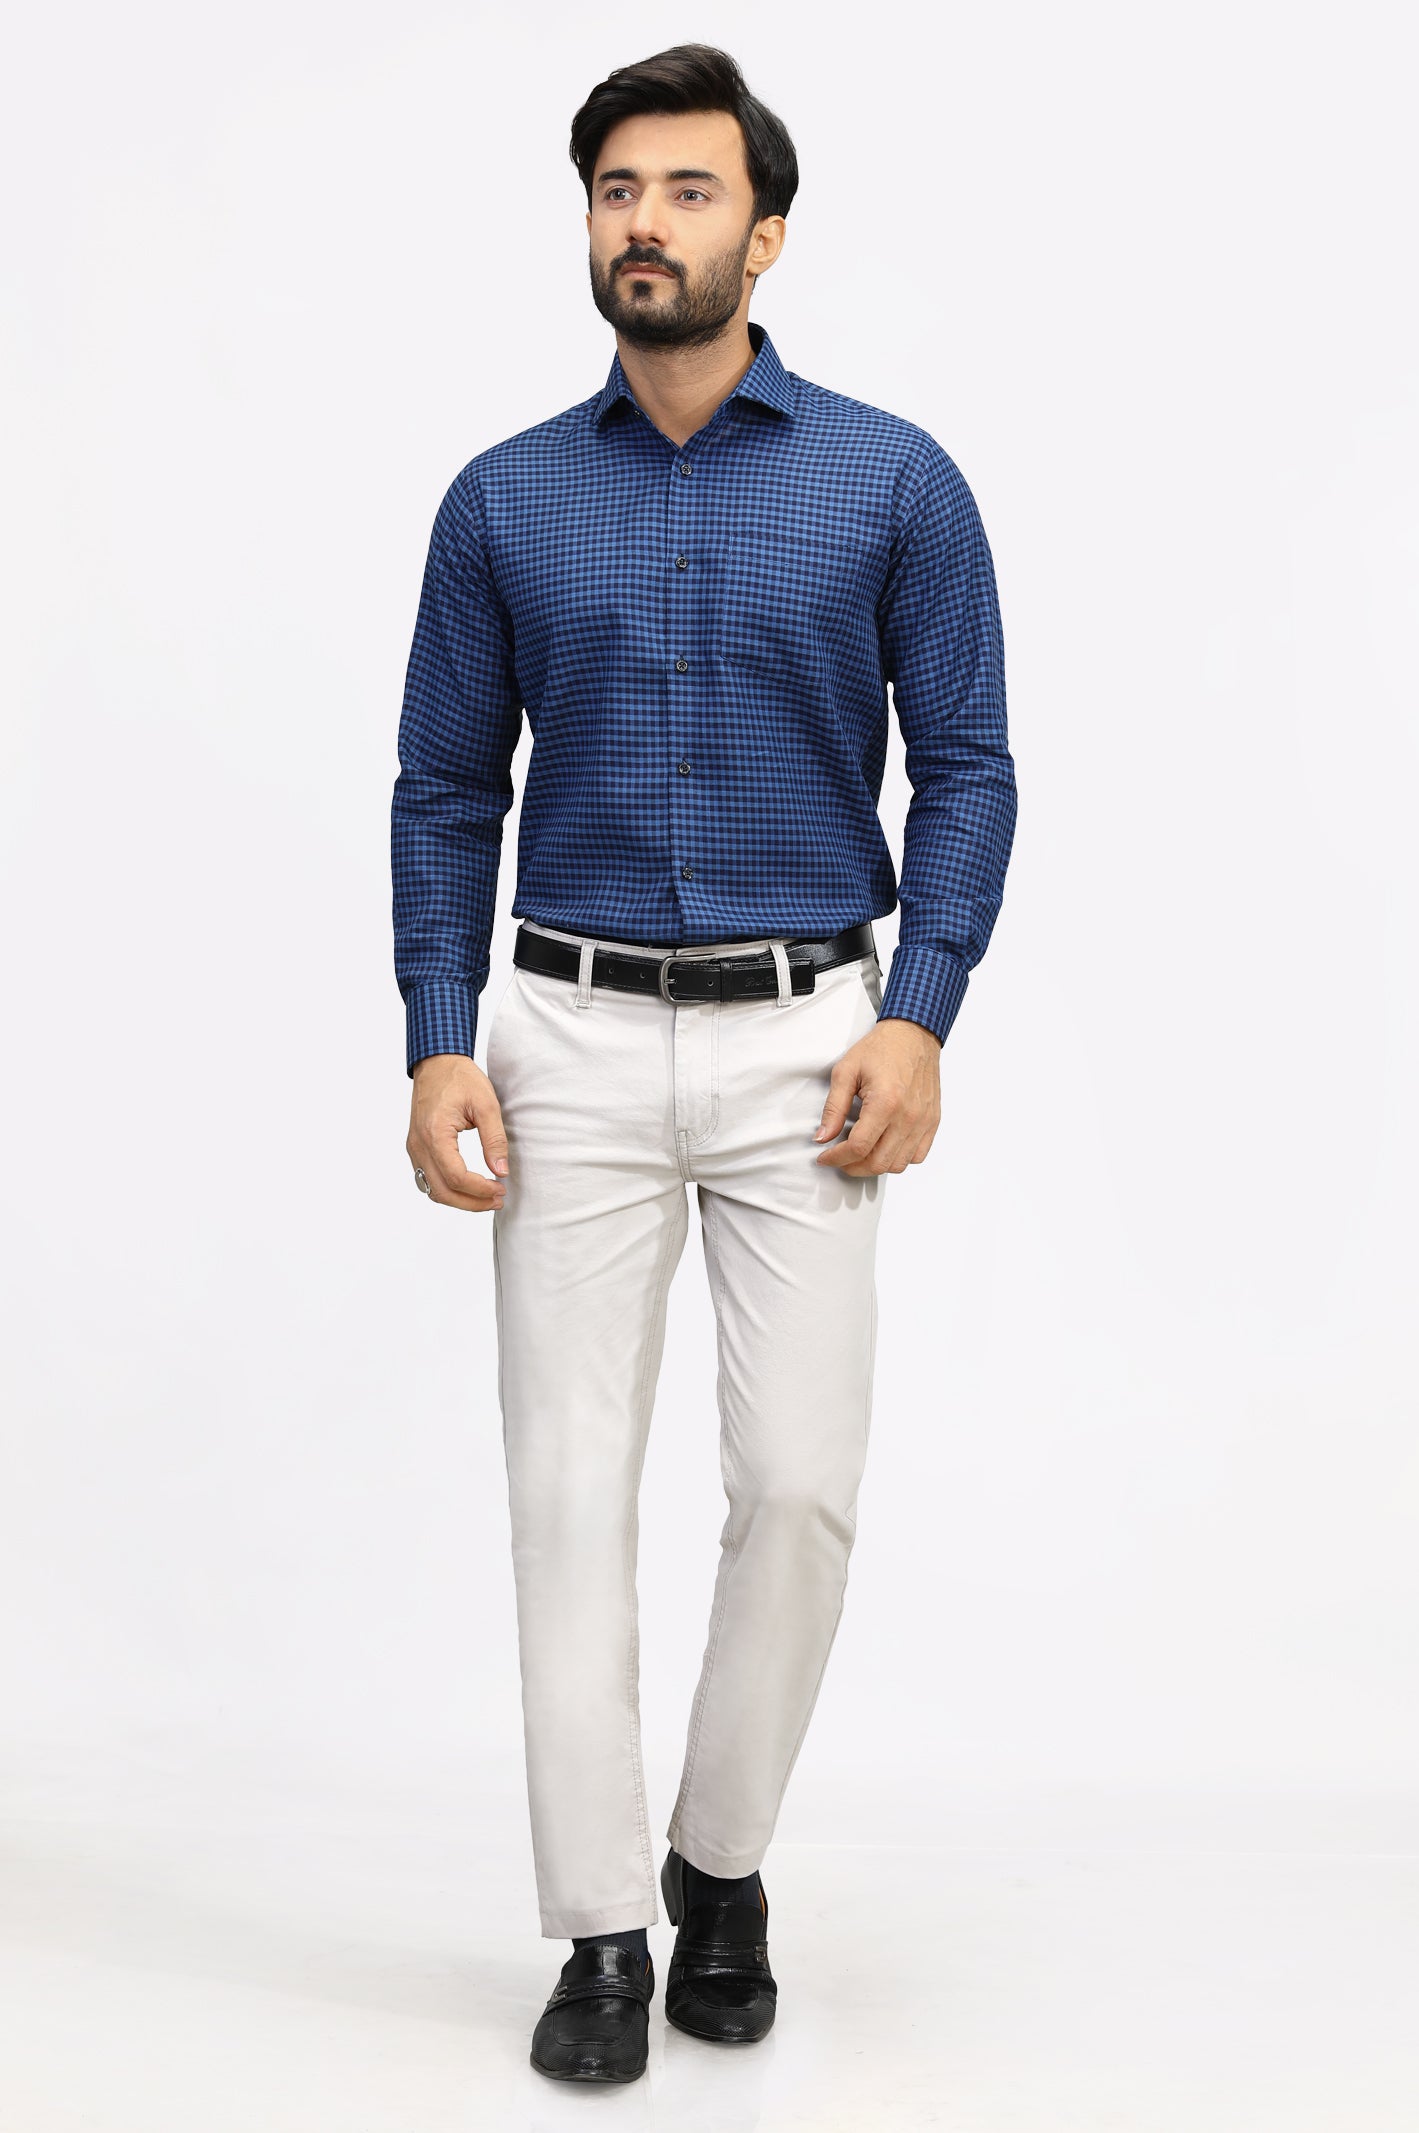 Blue Gingham Check Formal Shirt From Diners